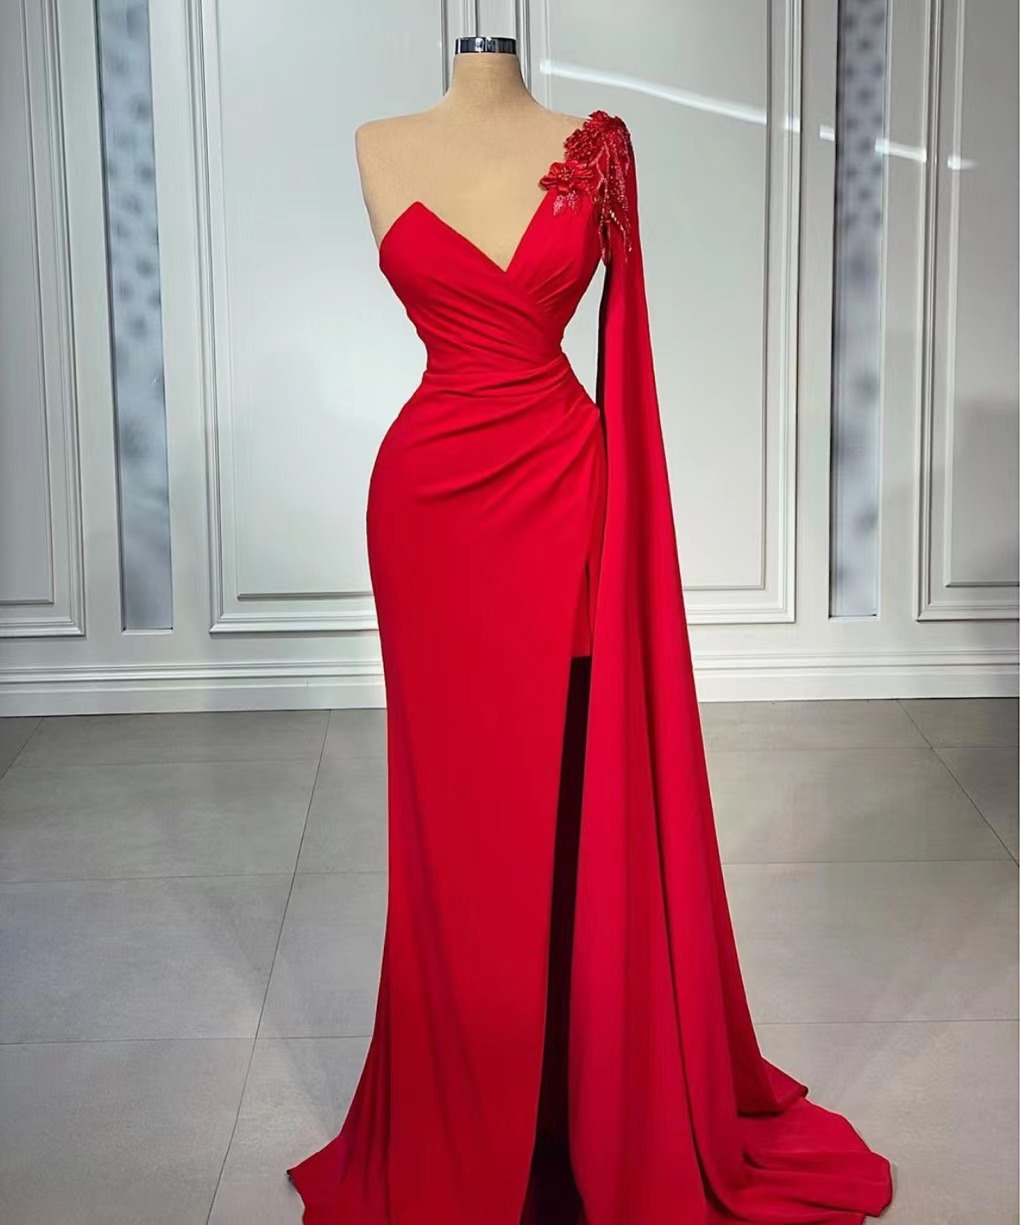 Red Evening Dress, Simple Prom Dresses, Abendkleider, Formal Dresses, Lace Applique Evening Dresses, Evening Dresses Long, Elegant Evening